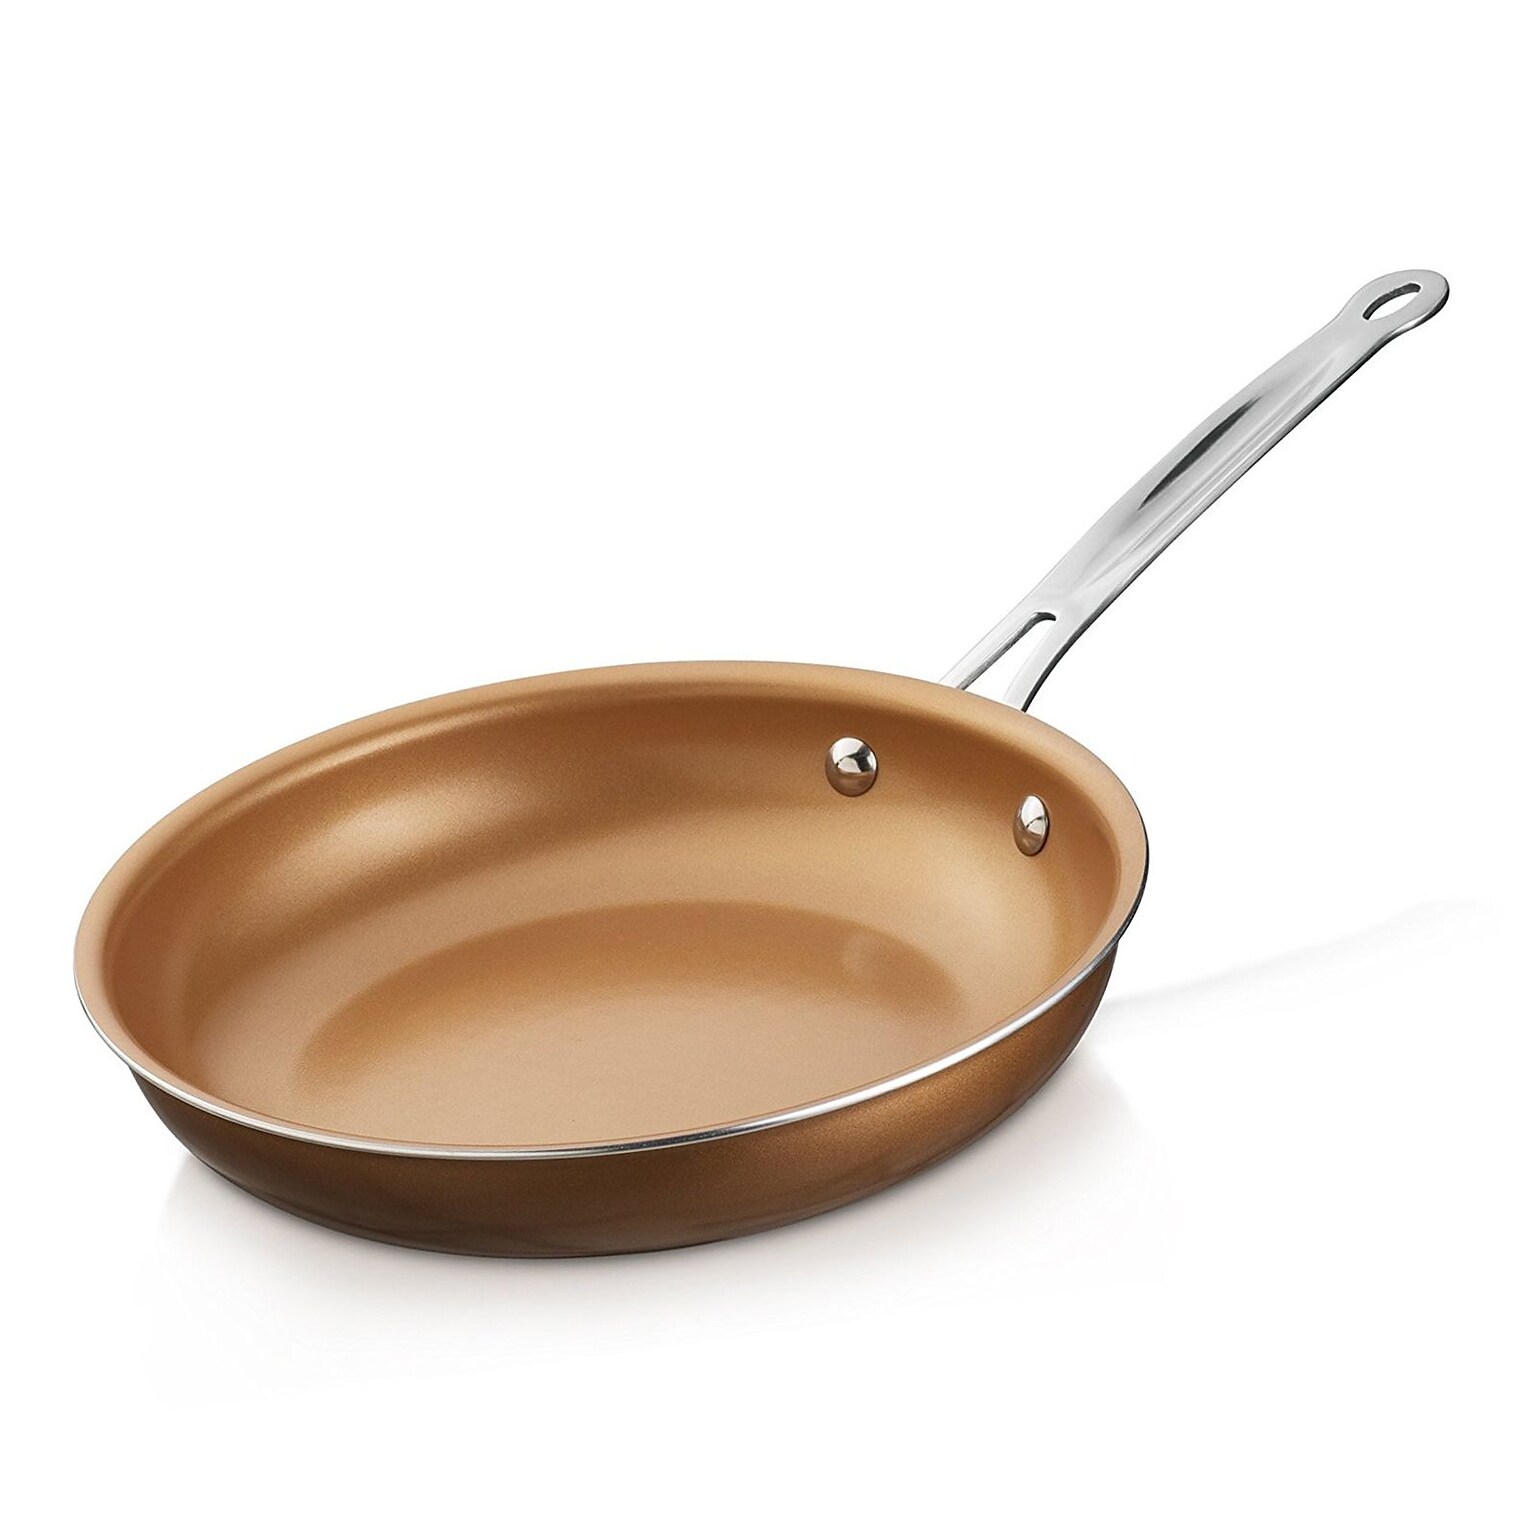 Brentwood 8 Induction Non-Stick Ceramic Coating Copper Frying Pan (93599879M)